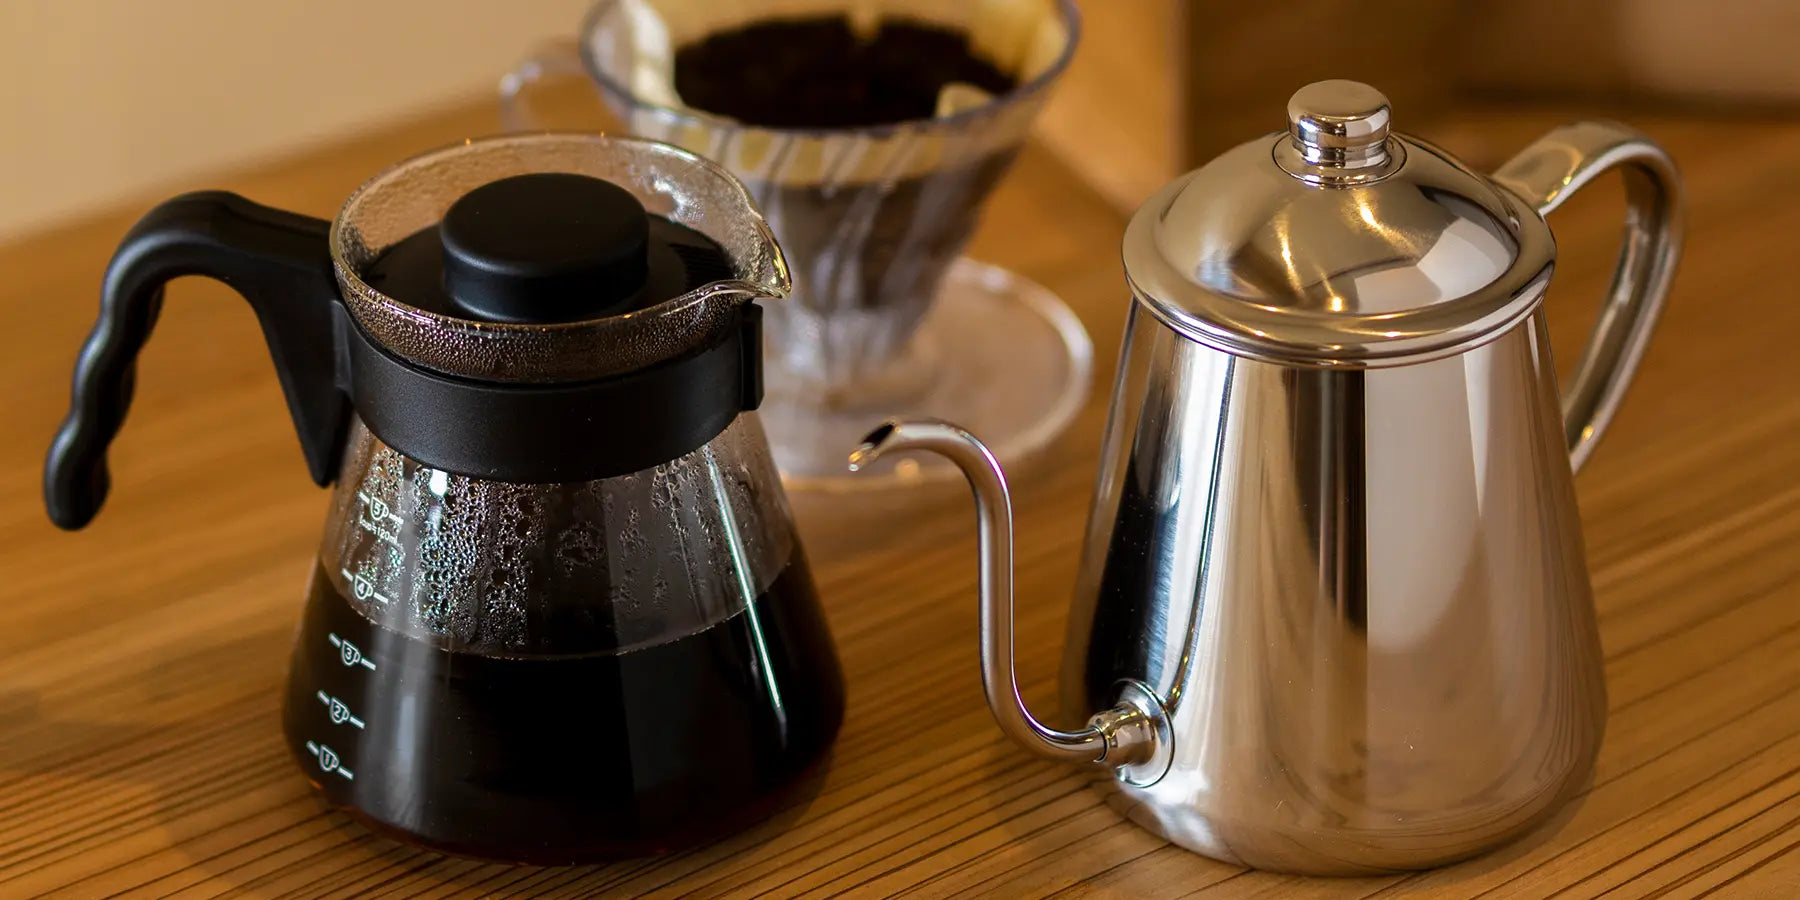 Discover our great selection of Drip Coffee Makers at Globalkitchen Japan.